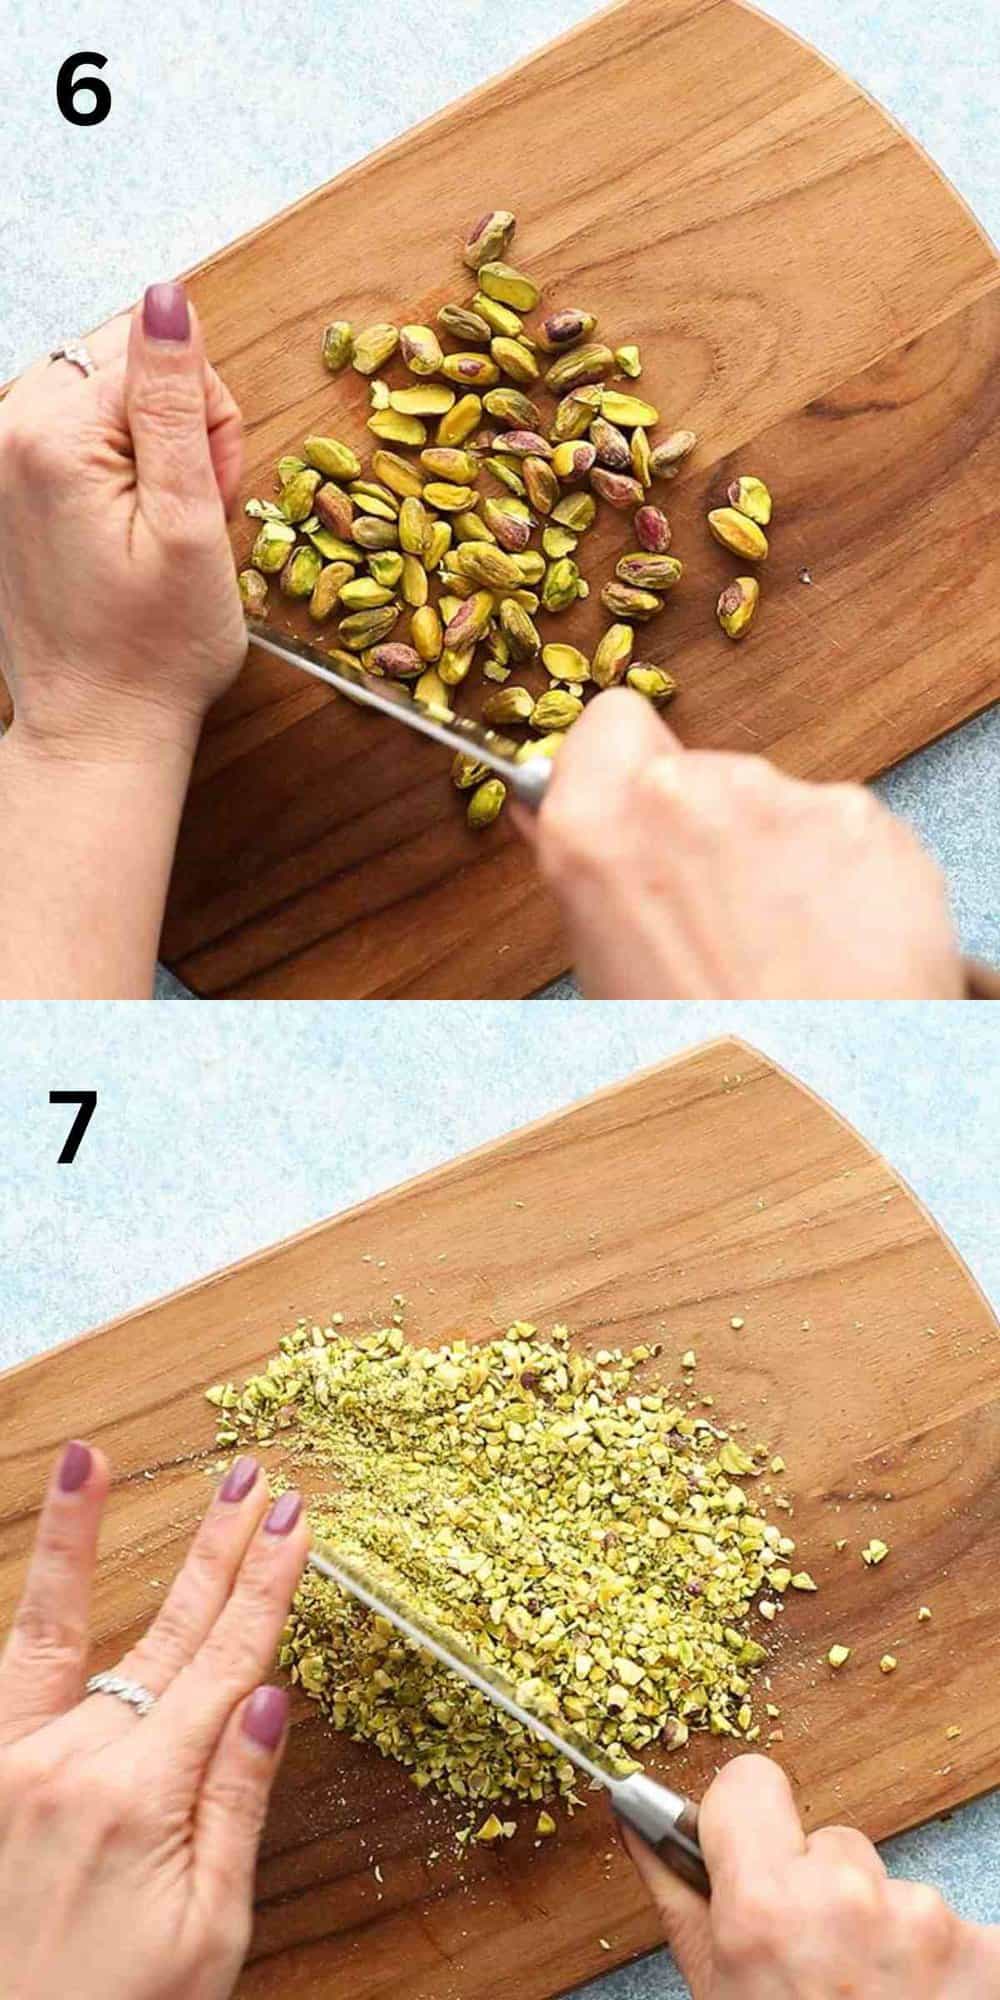 2 photo collage of two hands chopping pistachios on a wooden board. 